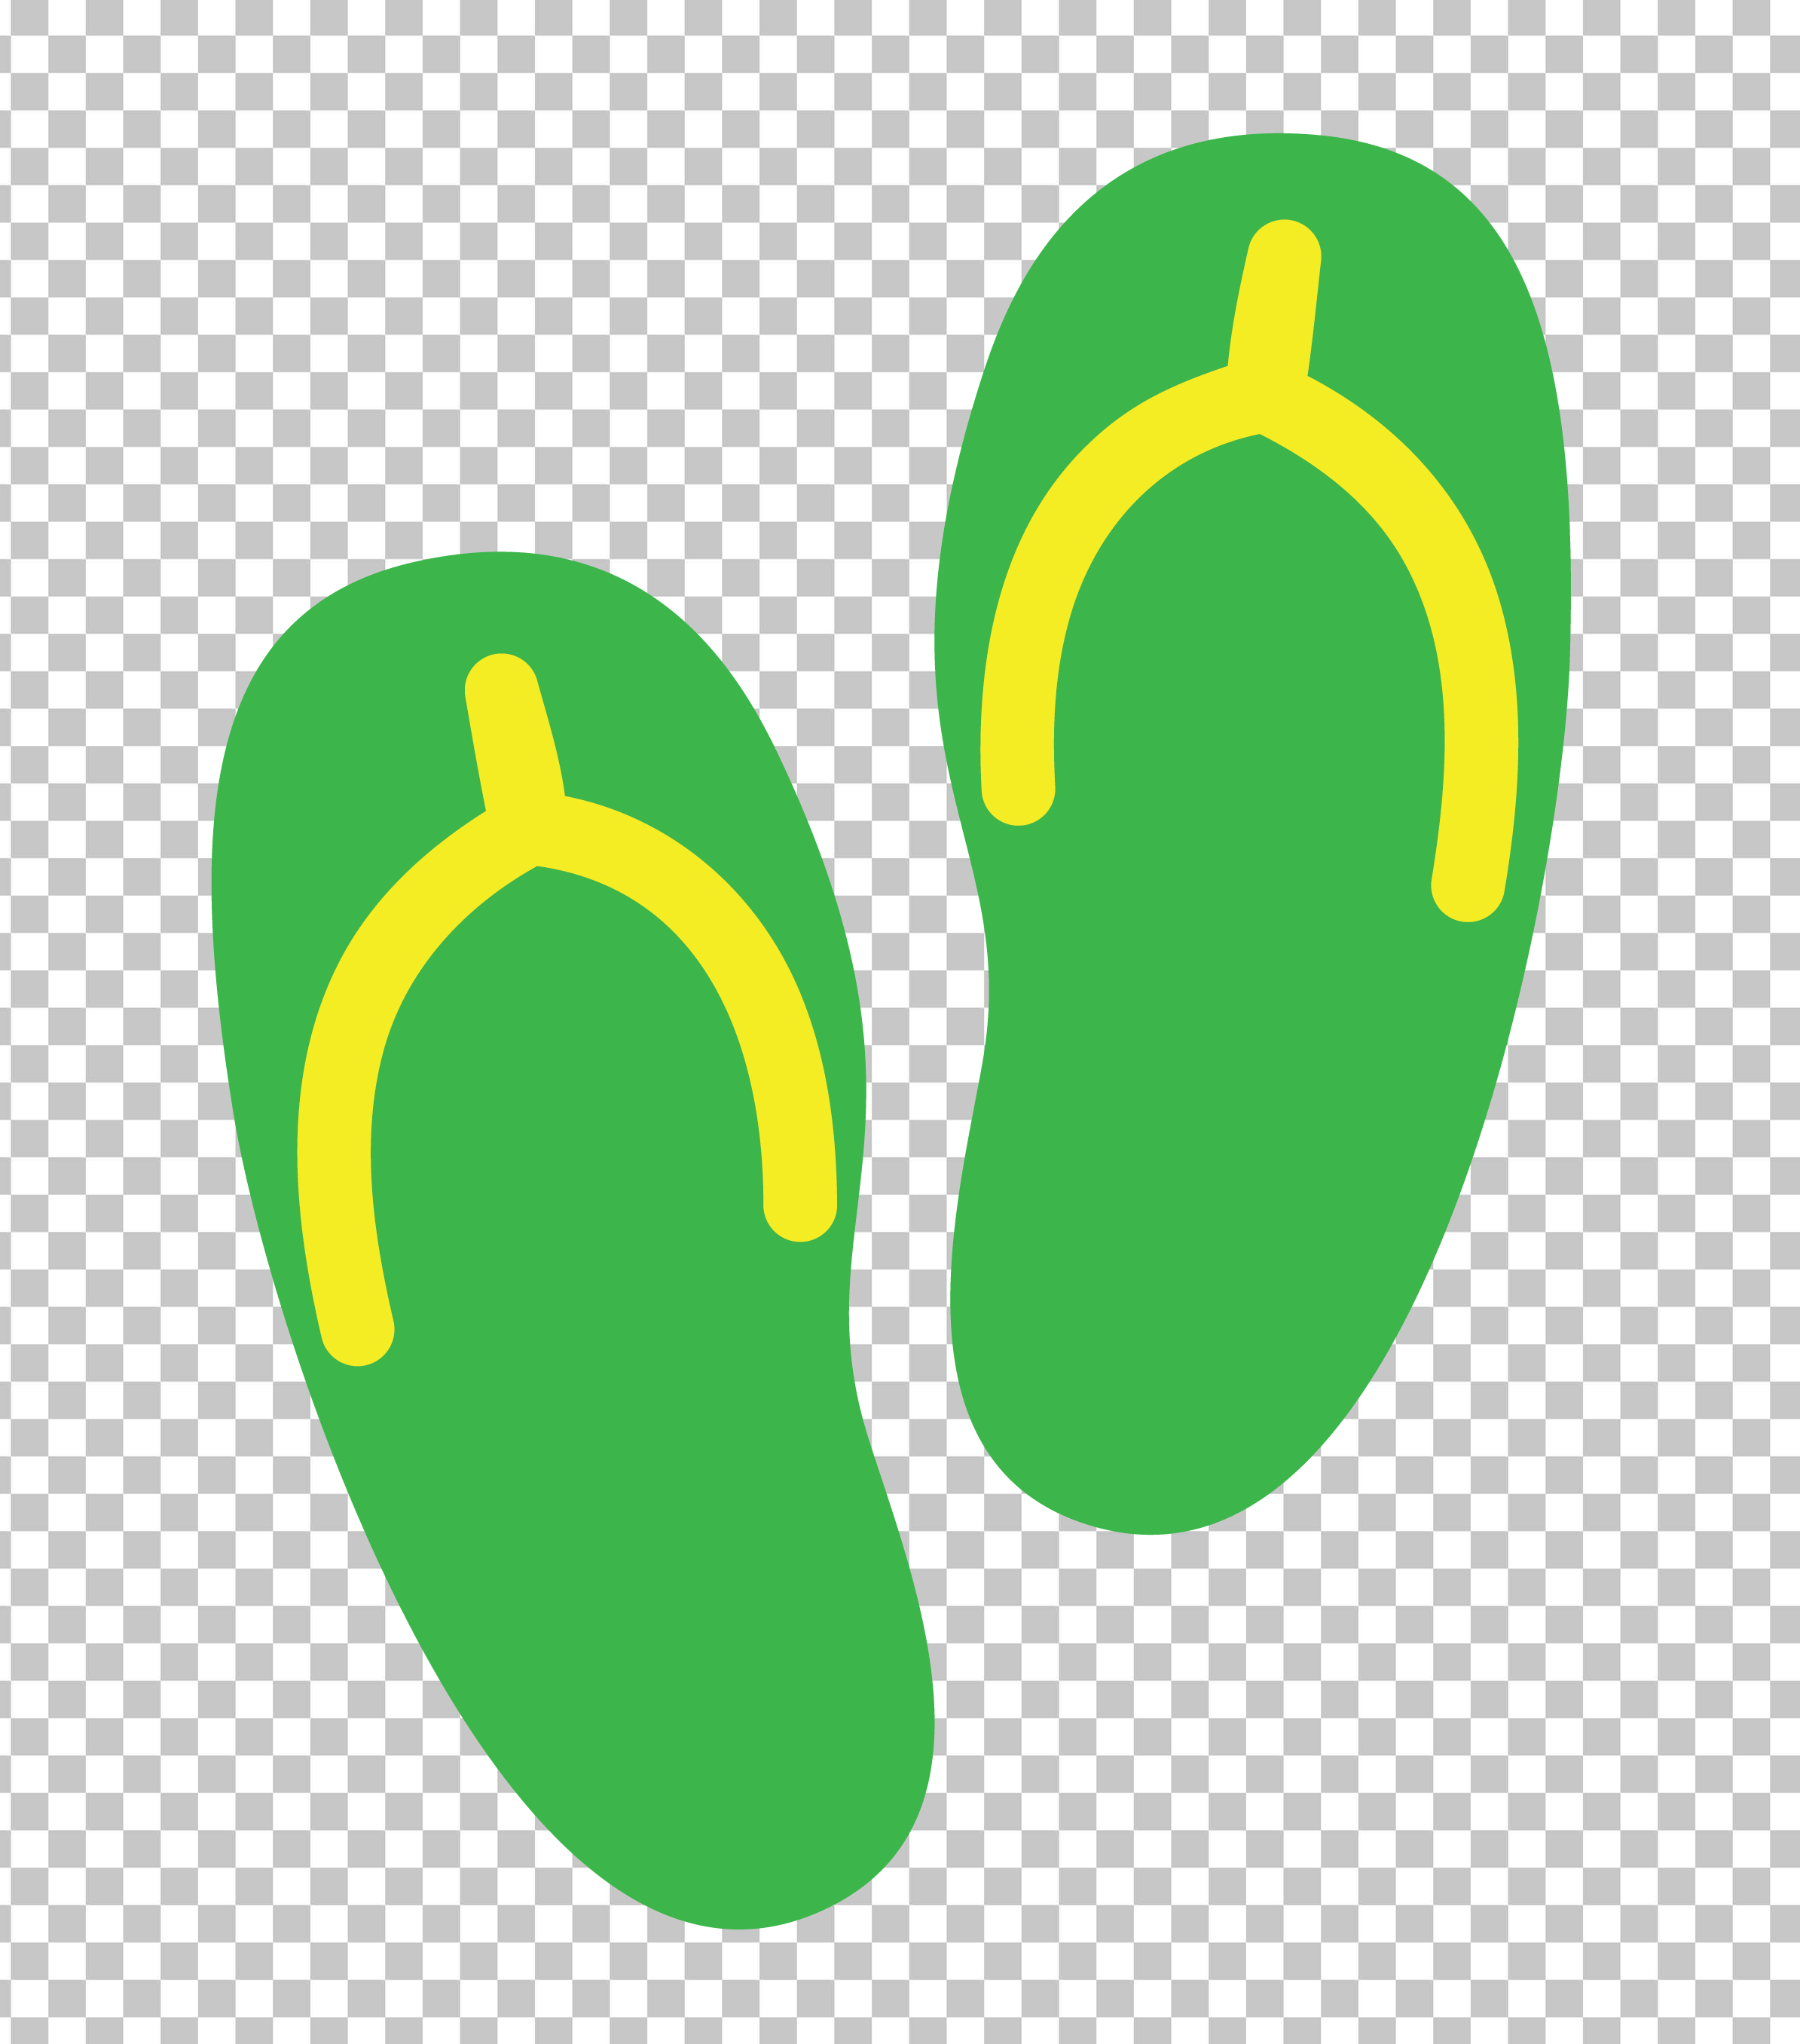 Green Flip Flops with Yellow Soles slippers PNG Image